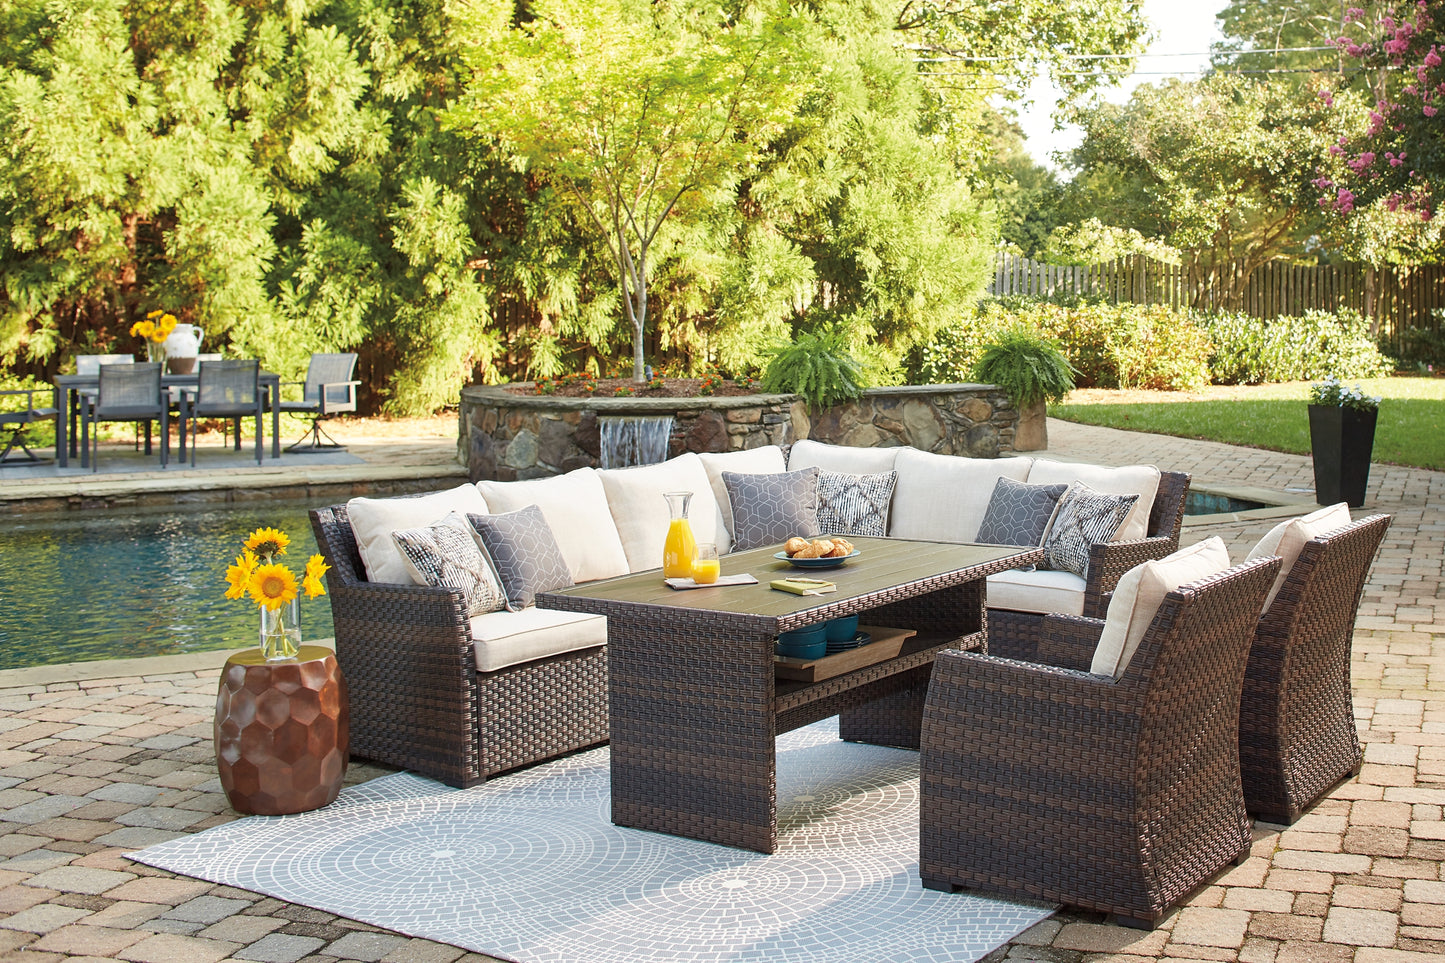 Easy Isle 3-Piece Outdoor Sectional with 2 Chairs and Coffee Table Signature Design by Ashley®